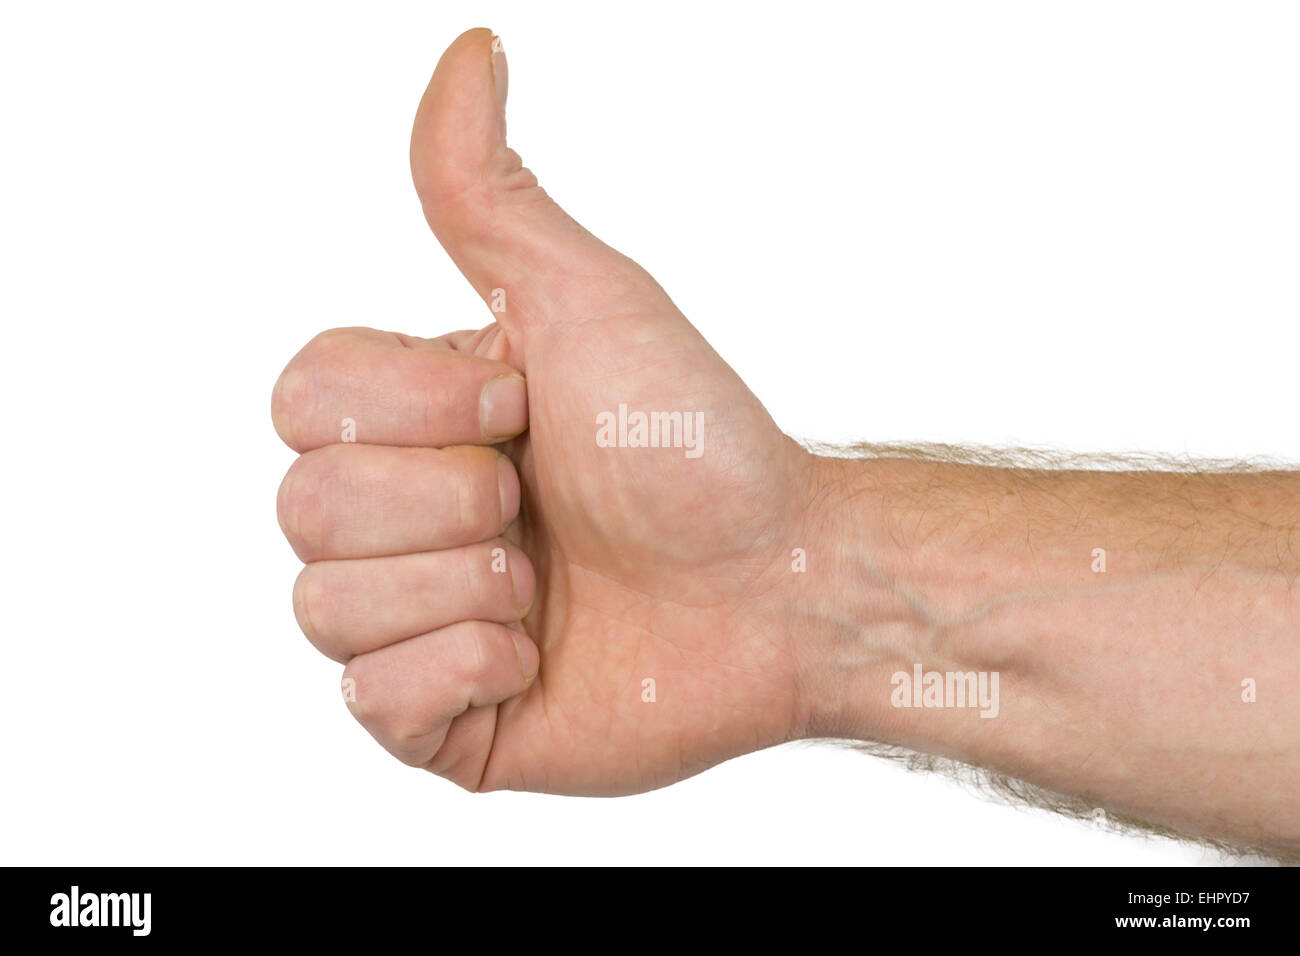 Thumb showing a sign Stock Photo